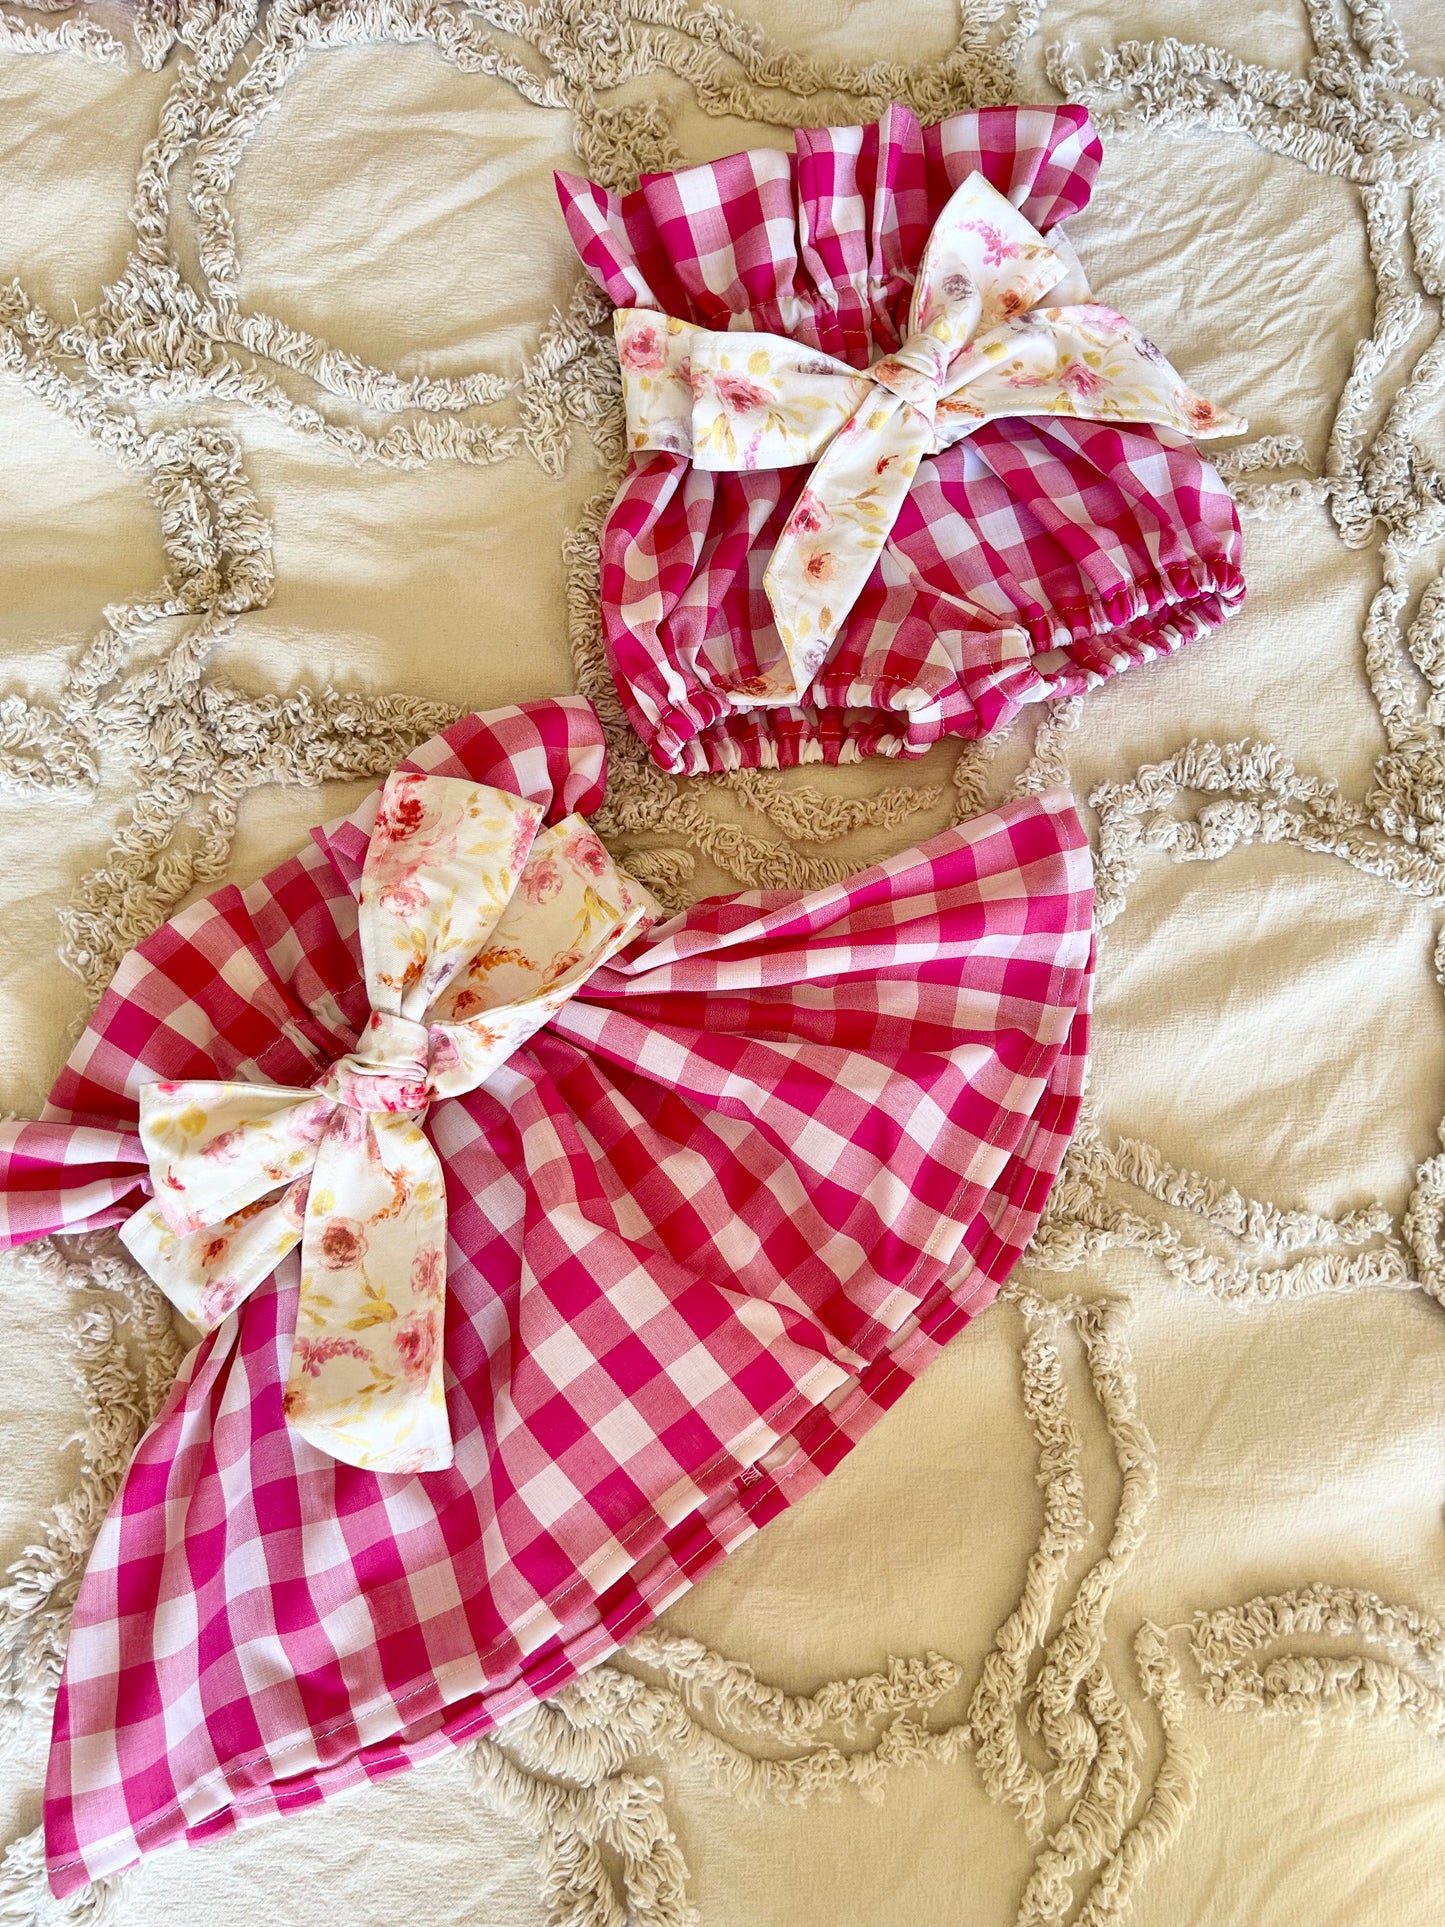 Gingham Paper Bag Bloomers/Skirt with Bow Sash